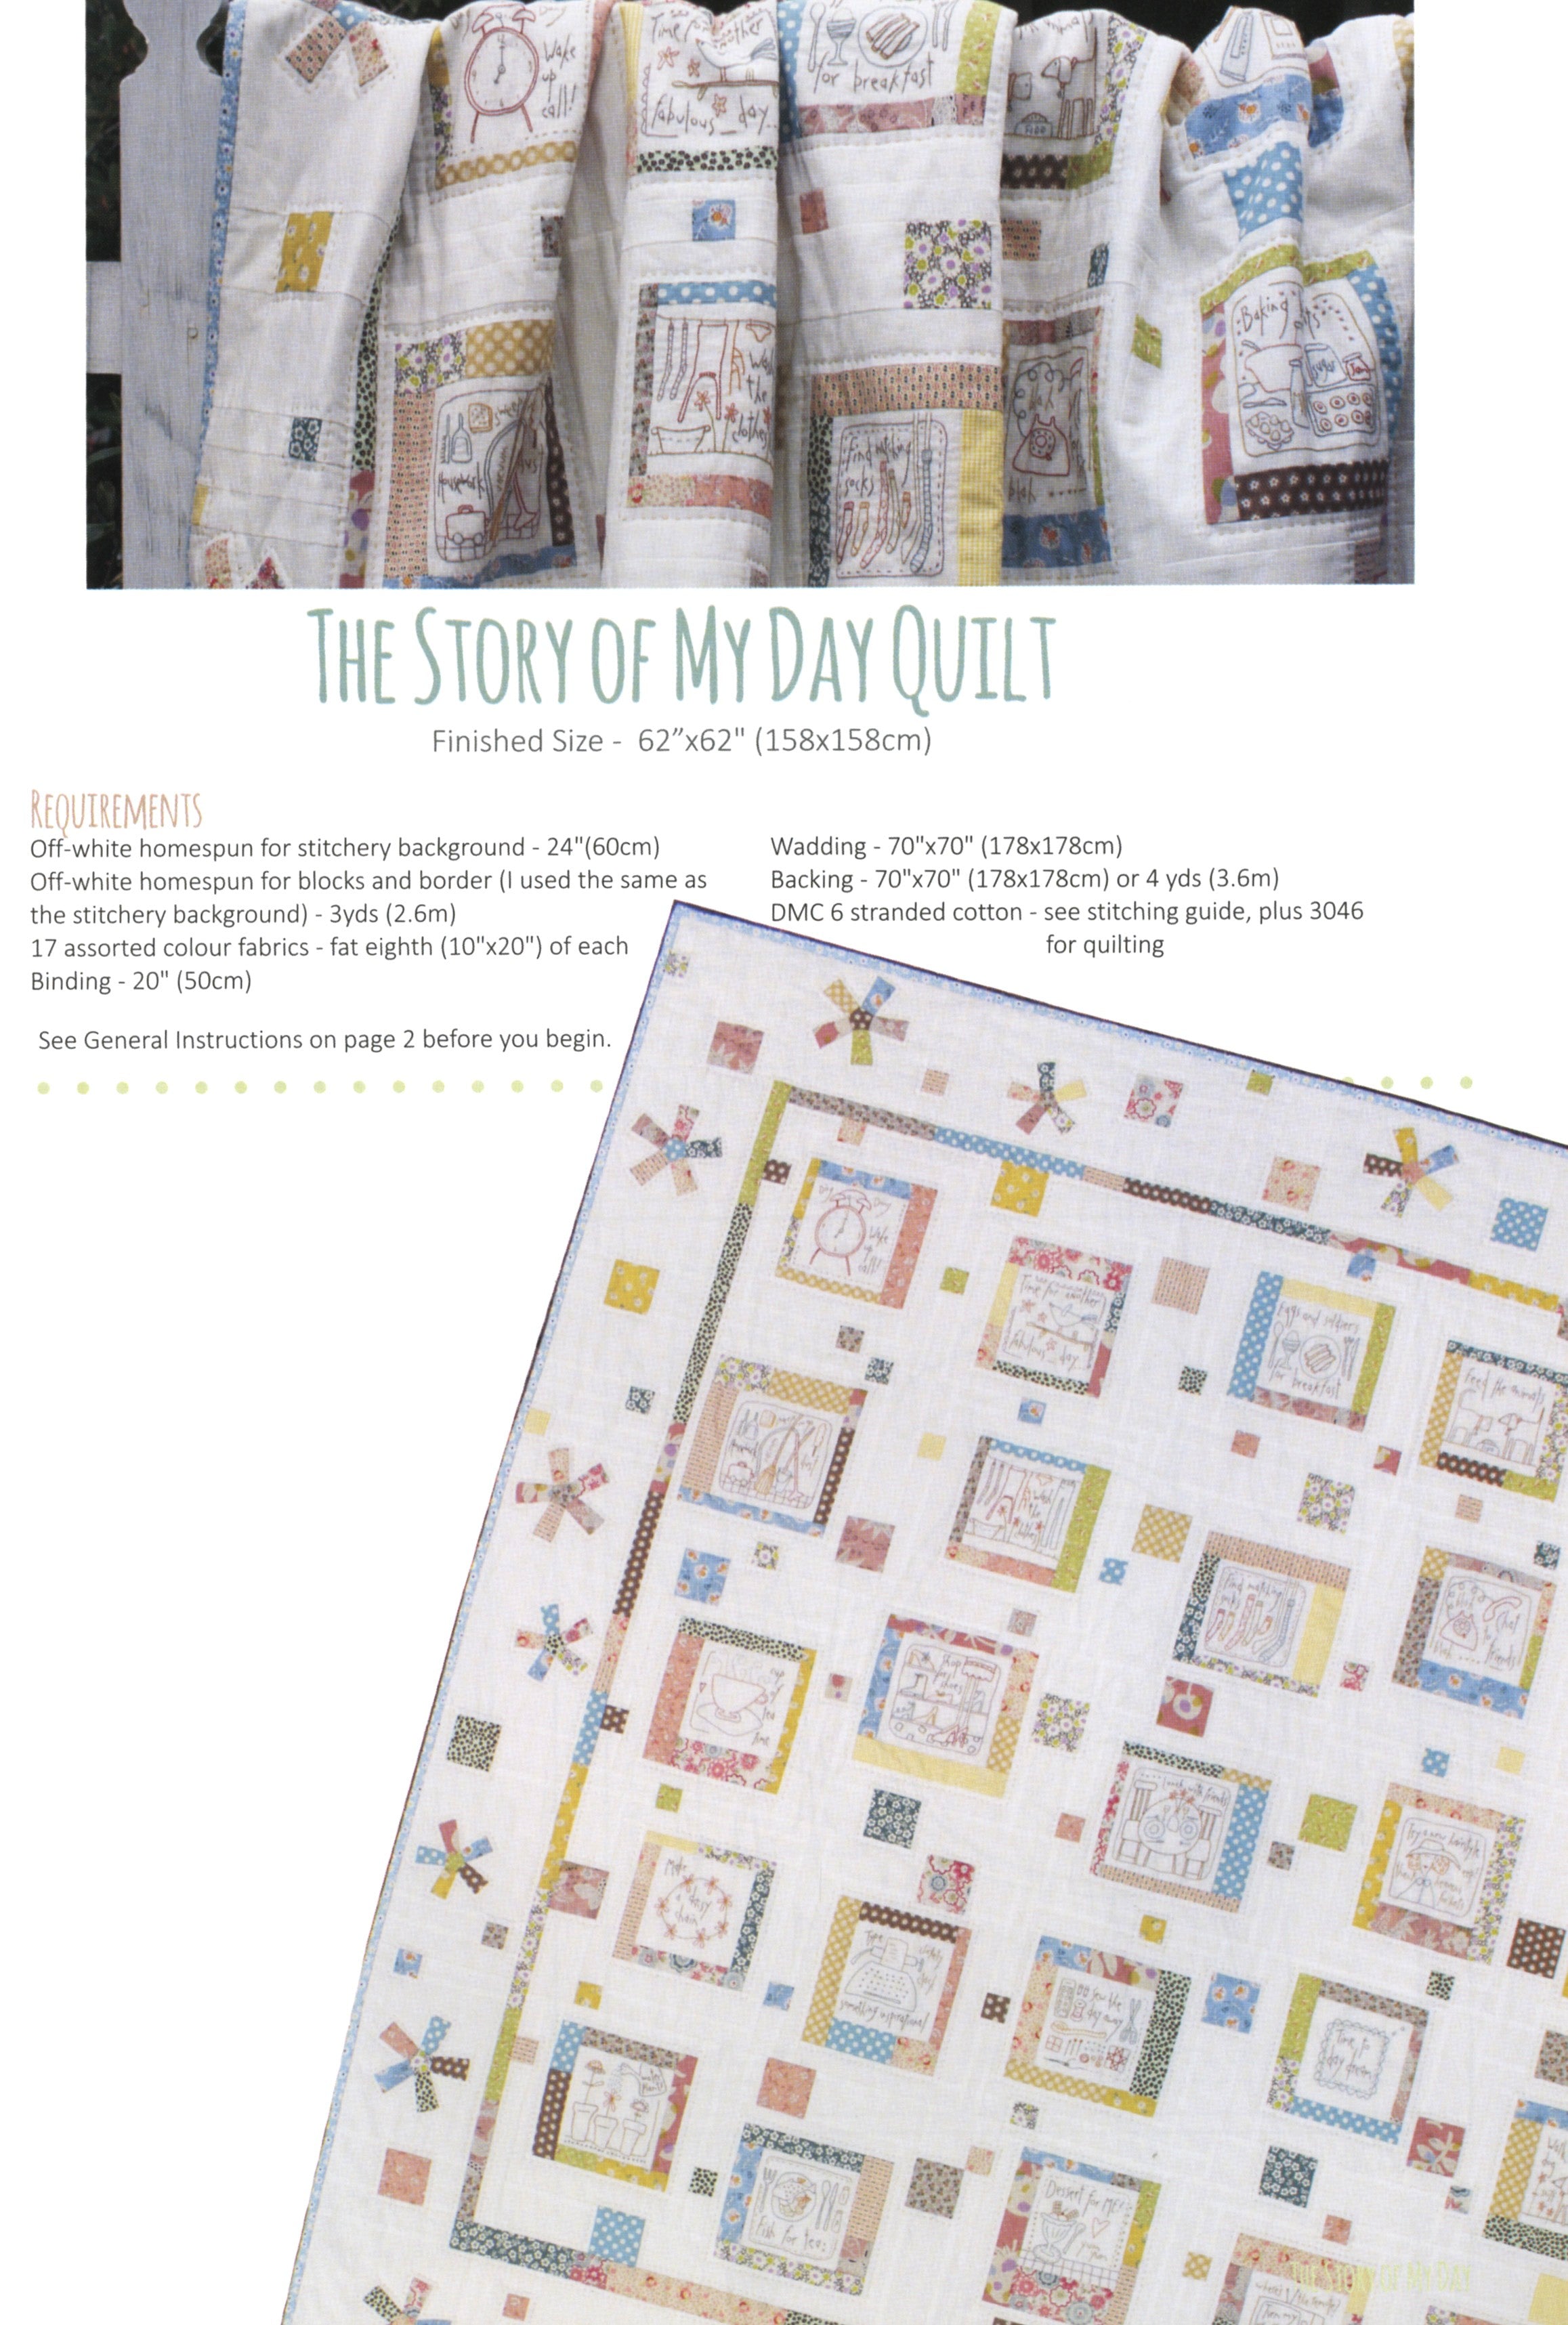 The Story of My Day Quilt Pattern Book by Anni Downs of Hatched and Patched